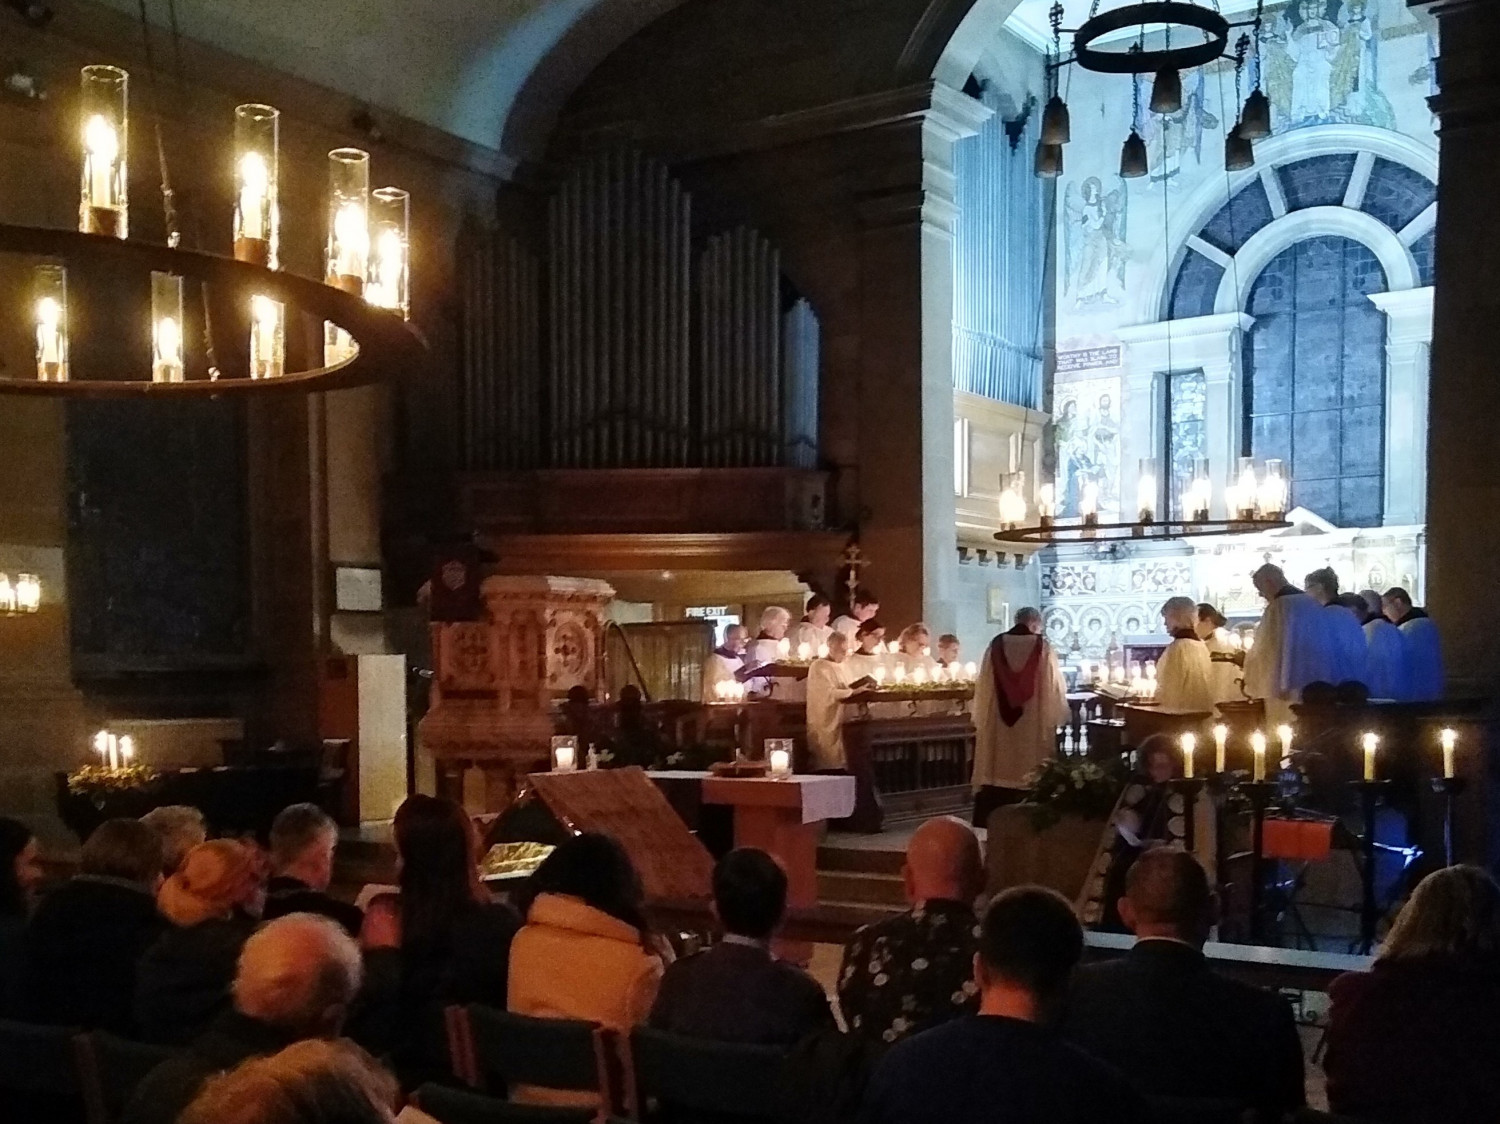 Carols by candlelight at St Johns